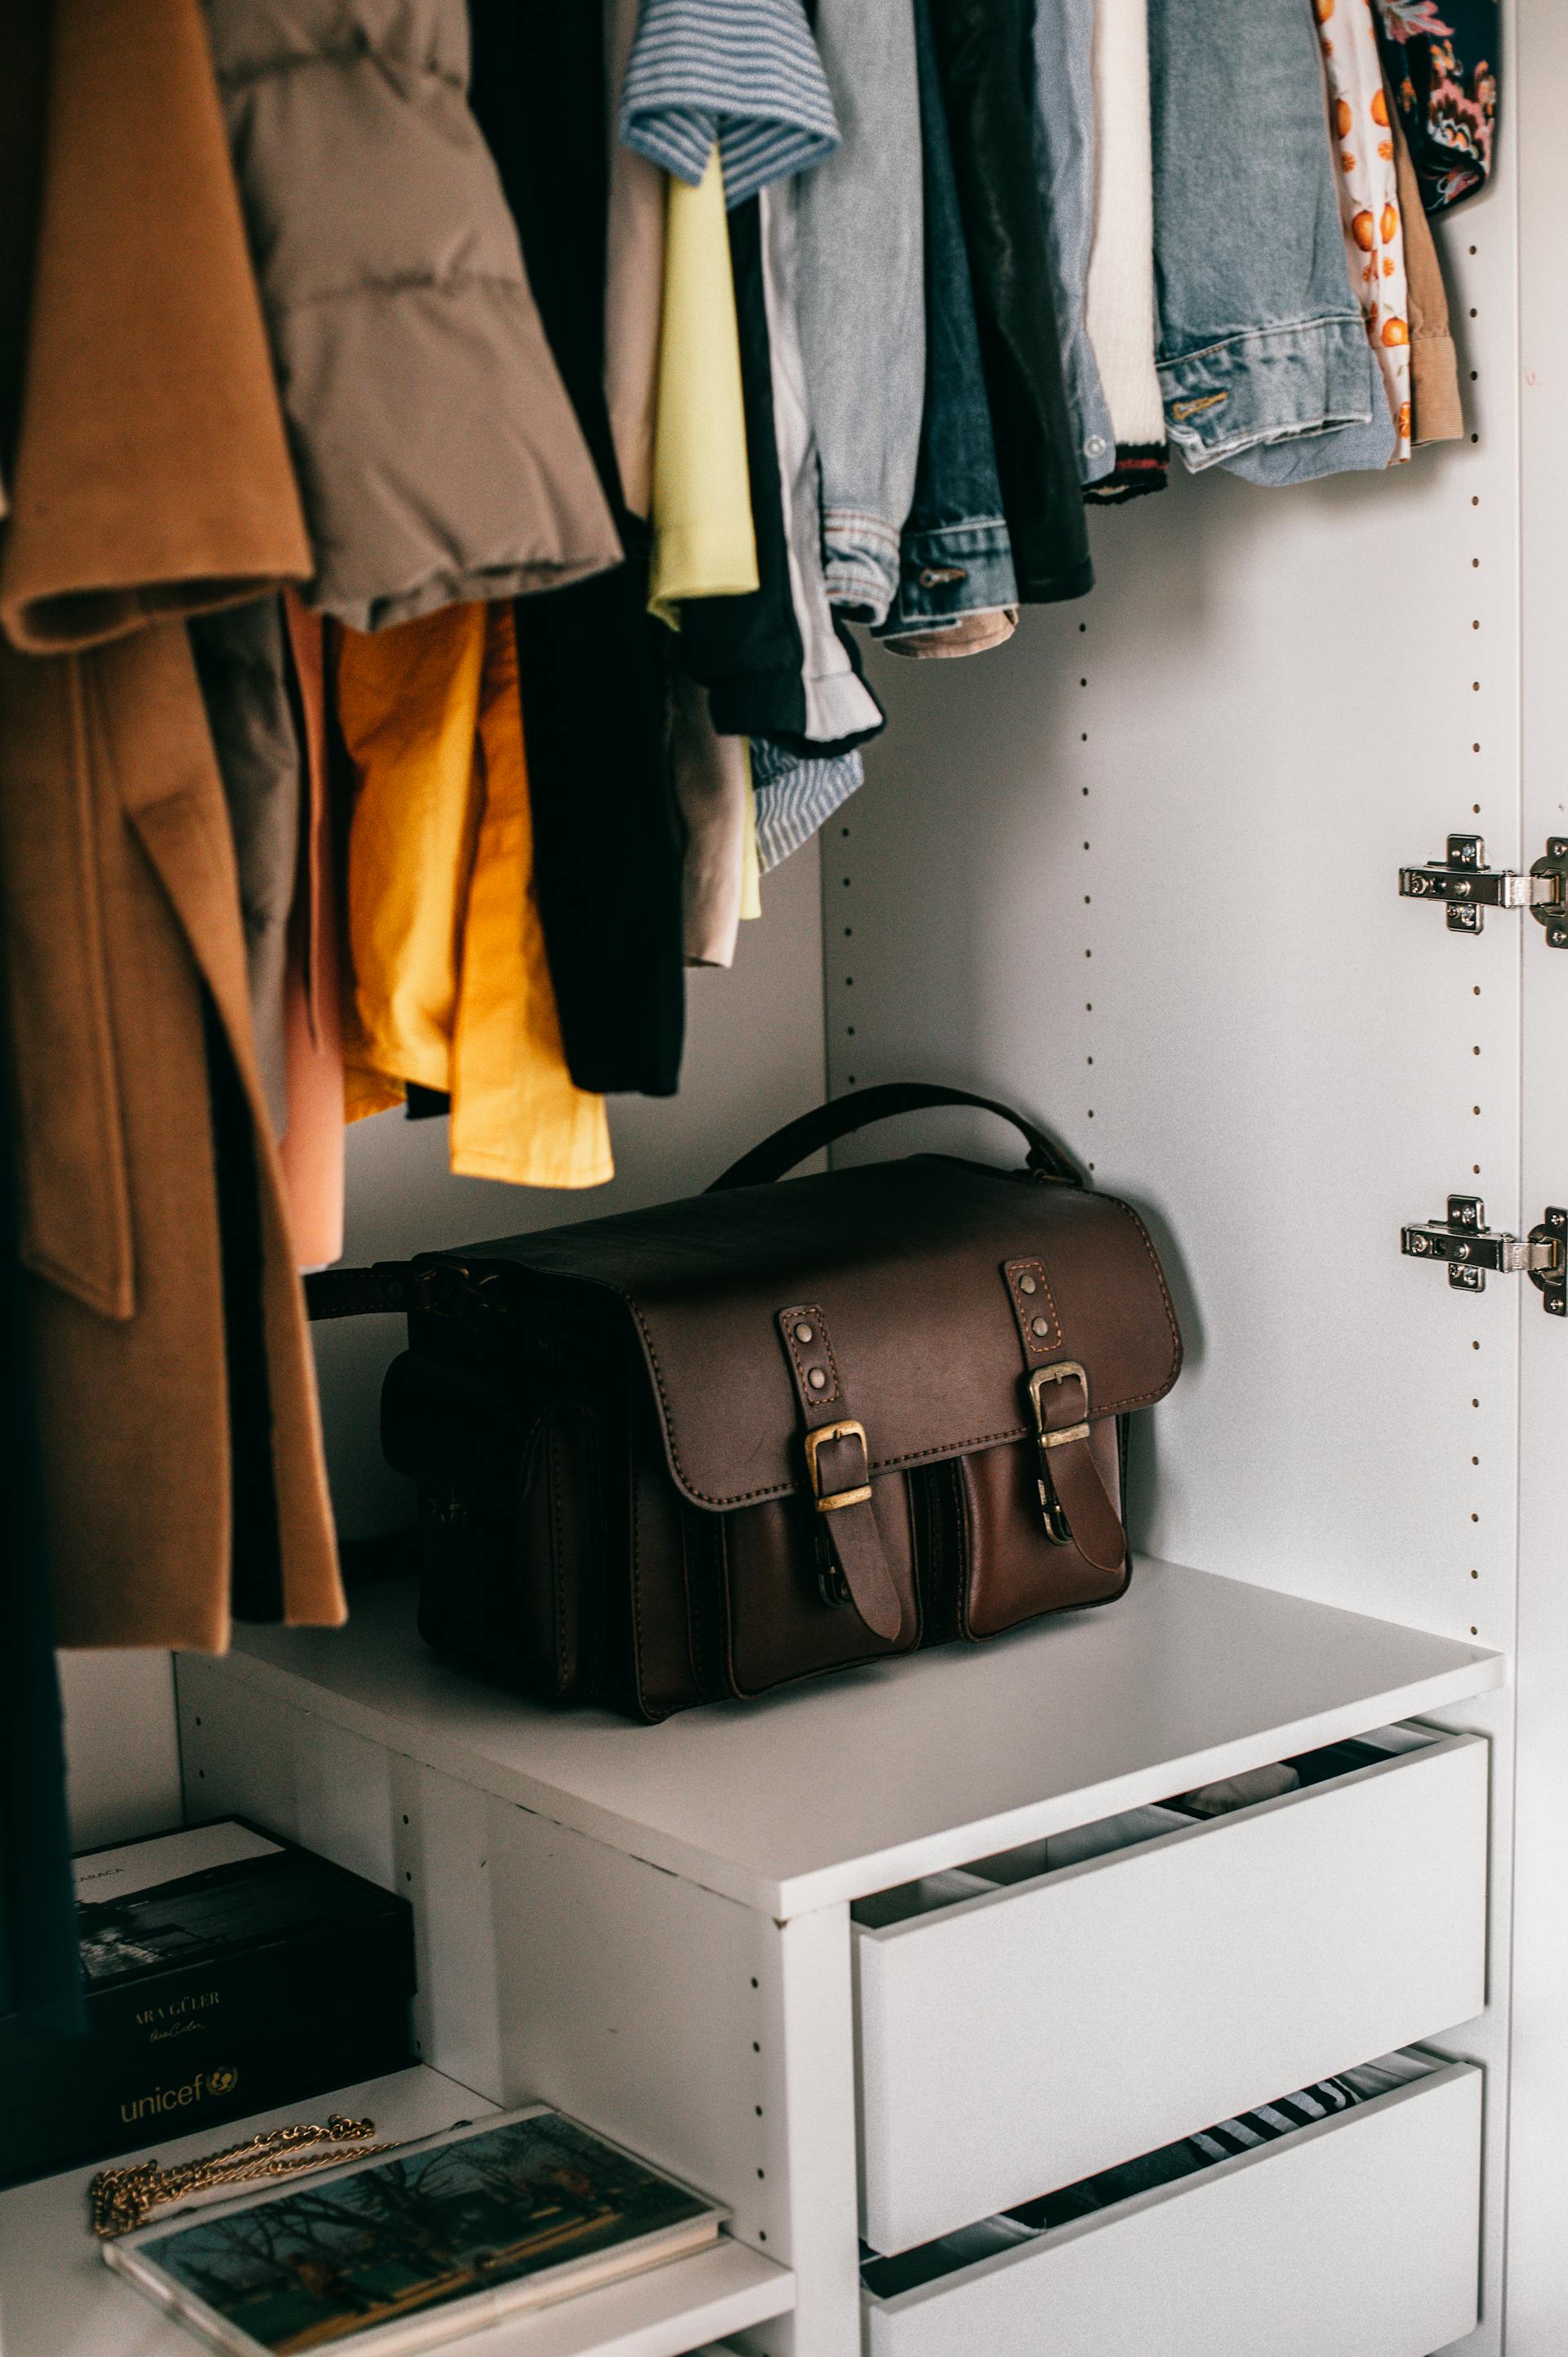 A wardrobe with clothes hanging | Source: Pexels